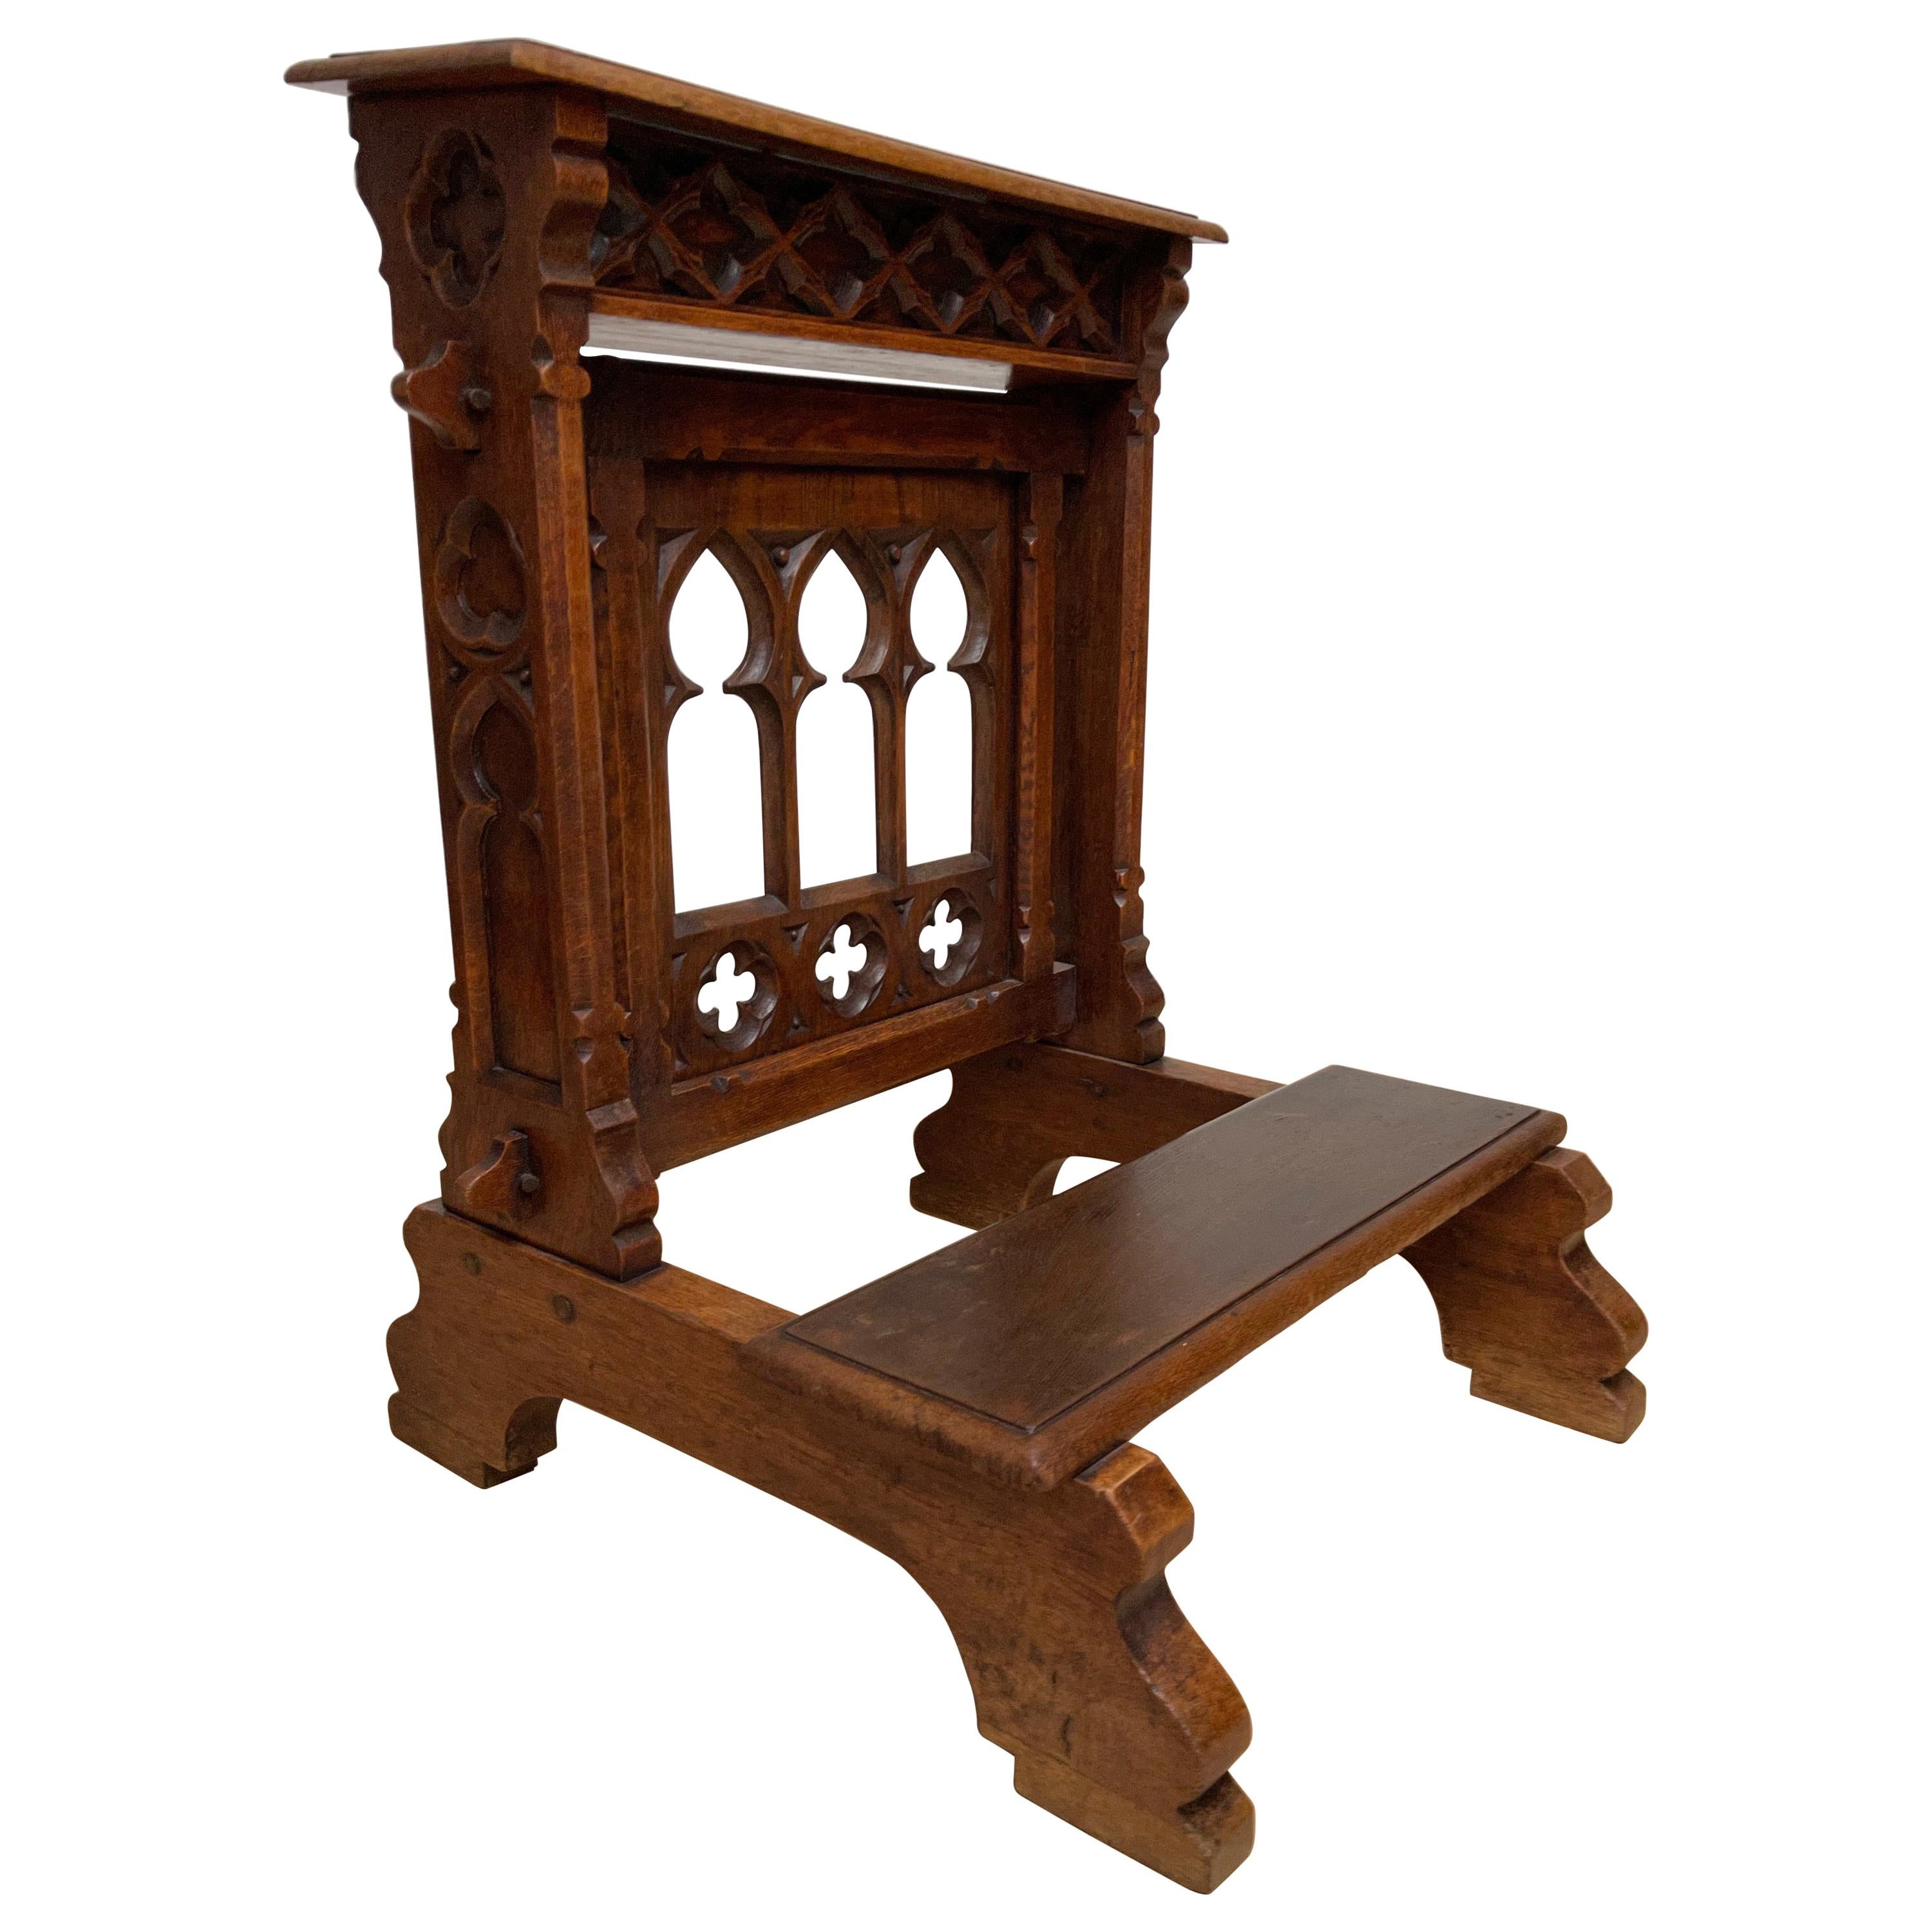 Antique Handcrafted & Carved Oak Gothic Revival Church Prayer Chair for Kneeling